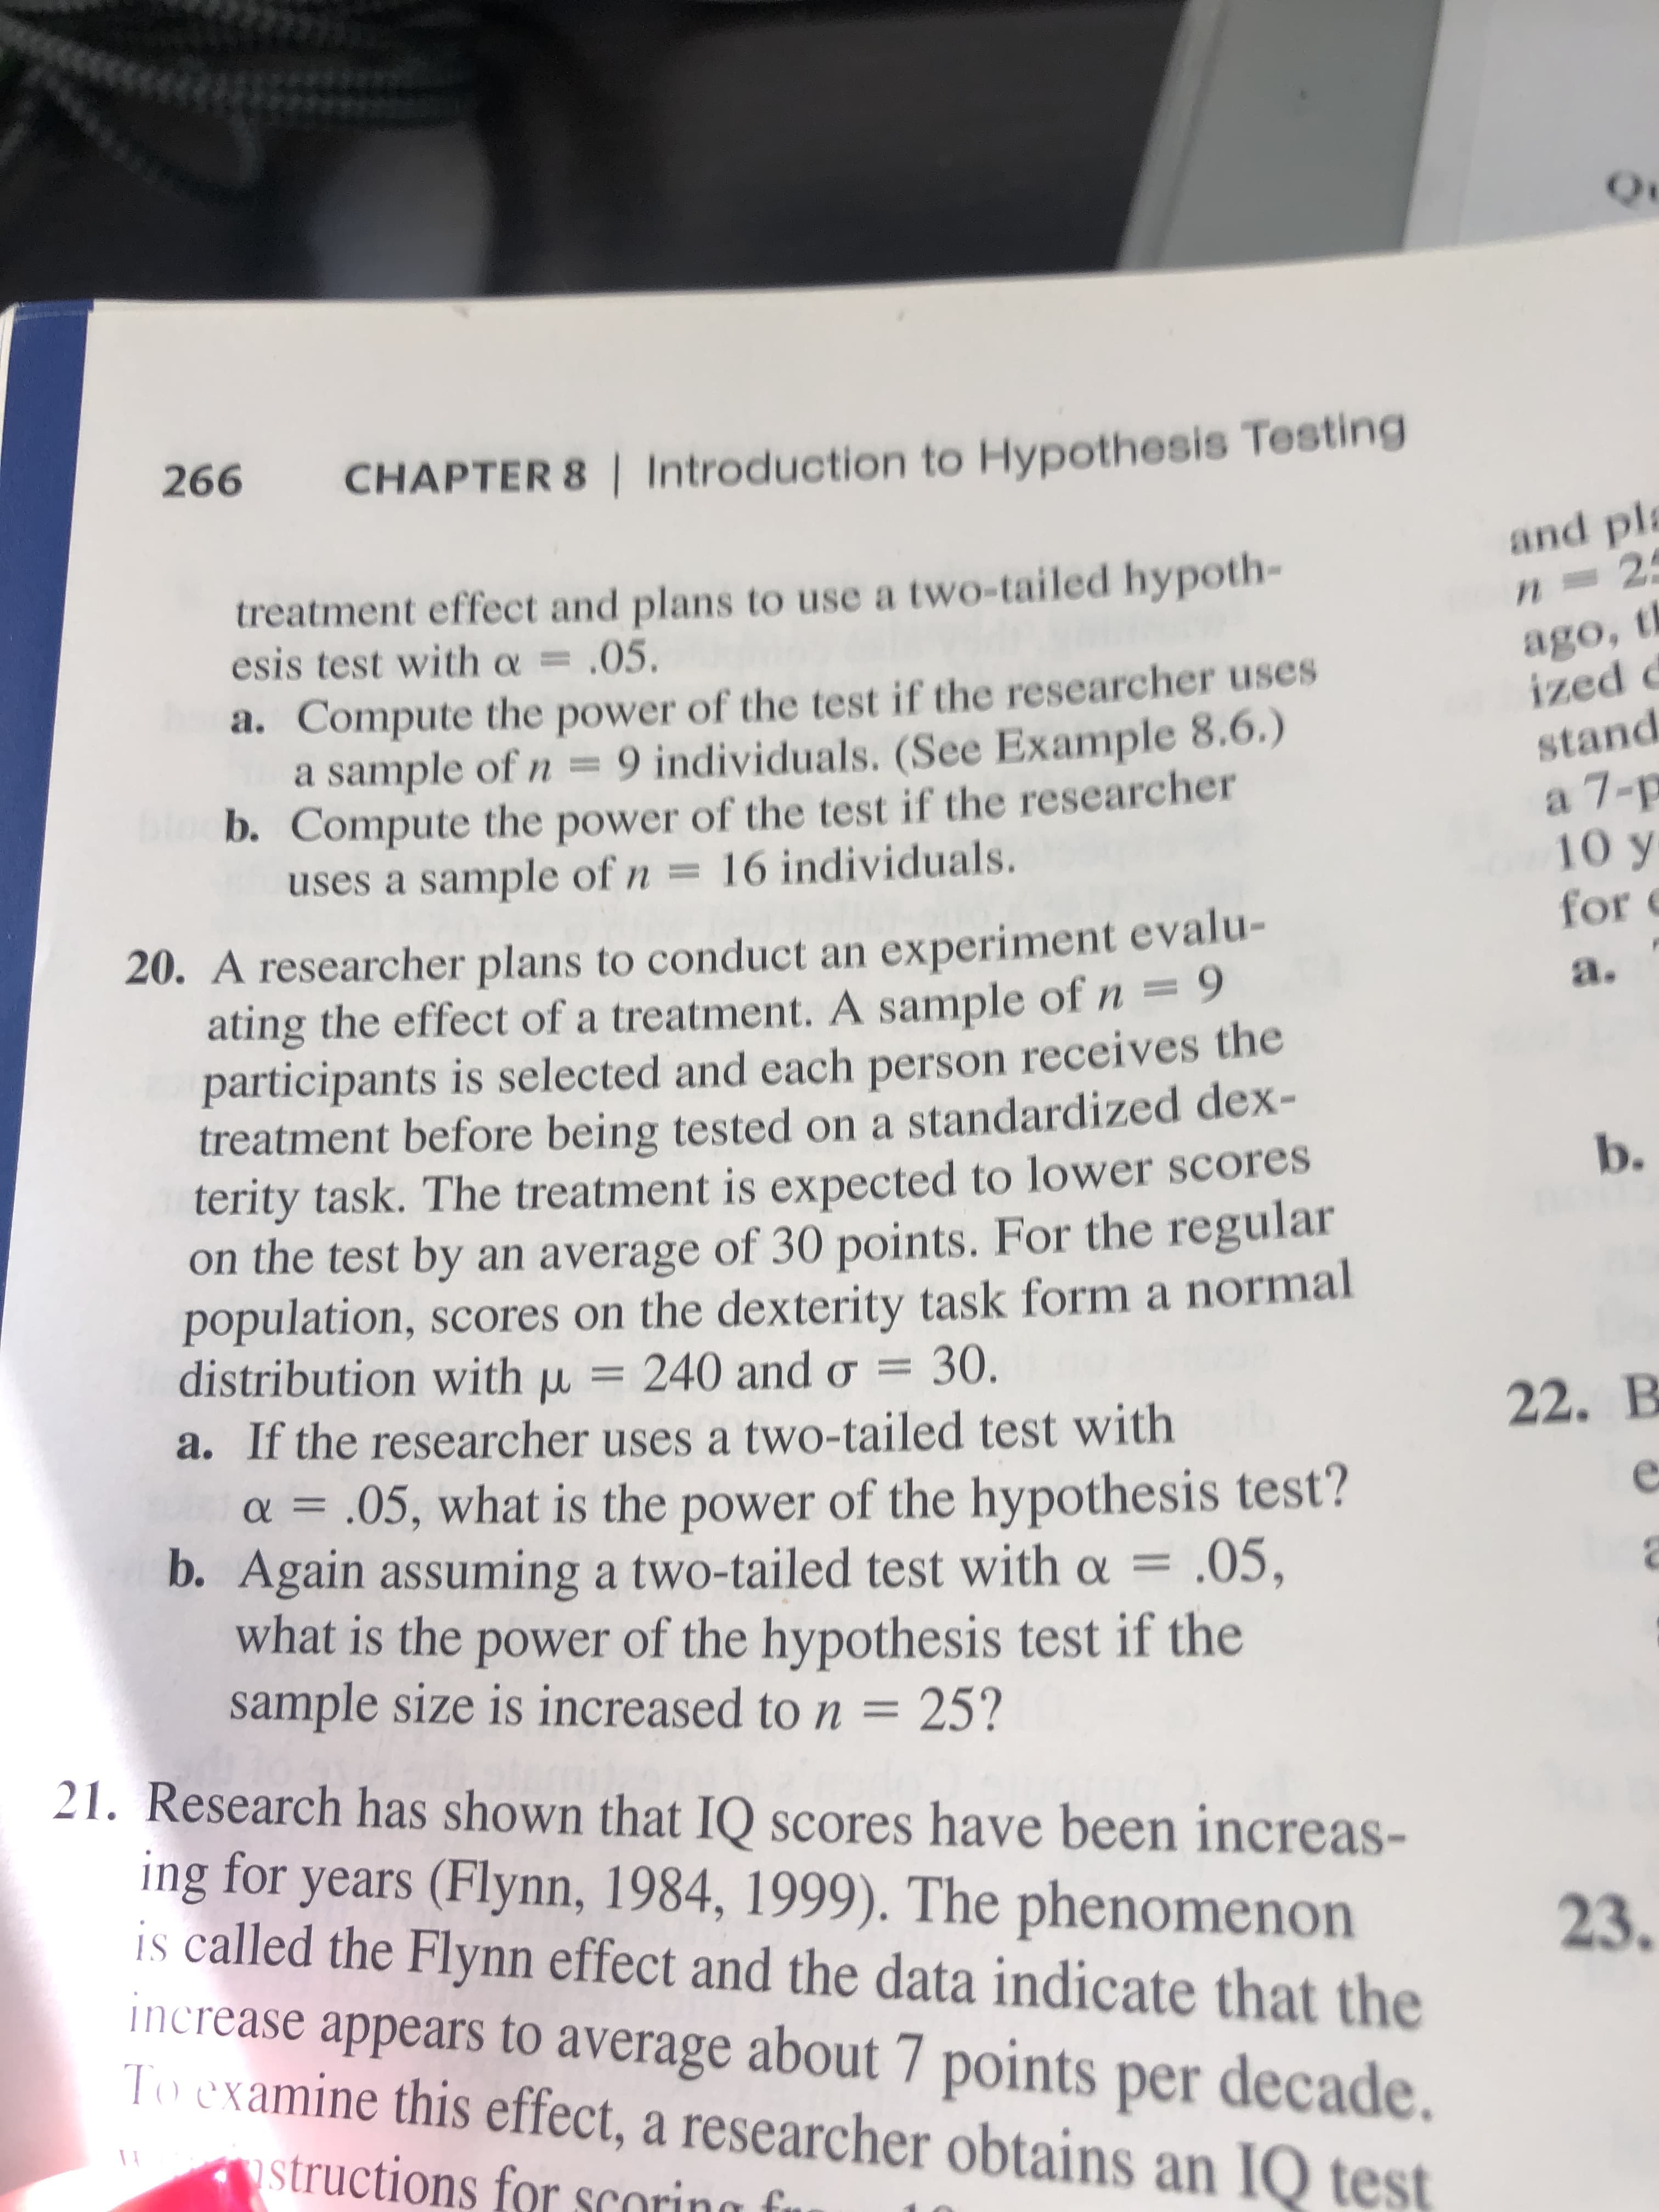 266
CHAPTER 8 | Introduction to Hypothesis Testing
and pl
treatment effect and plans to use a two-tailed hypoth-
esis test with a= .05
n 2
ago, t
ized d
a. Compute the power of the test if the researcher uses
a sample of n =9 individuals. (See Example 8.6.)
b. Compute the power of the test if the researcher
uses a sample of n 16 individuals.
stand
а 7-р
10 y
for
20. A researcher plans to conduct an experiment evalu-
ating the effect of a treatment. A sample of n=9
participants is selected and each person receives the
treatment before being tested on a standardized dex-
terity task. The treatment is expected to lower scores
on the test by an average of 30 points. For the regular
poulation, scores on the dexterity task form a normal
distribution with u = 240 and o 30.
a. If the researcher uses a two-tailed test with
а.
b.
22. В
a = .05, what is the power of the hypothesis test?
b. Again assuming a two-tailed test with o = .05,
what is the power of the hypothesis test if the
sample size is increased to n = 25?
21. Research has shown that IQ scores have been increas-
ing for years (Flynn, 1984, 1999). The phenomenon
is called the Flynn effect and the data indicate that the
increase appears to average about 7 points per decade.
To examine this effect, a researcher obtains an IQ test
23.
structions for scoring
